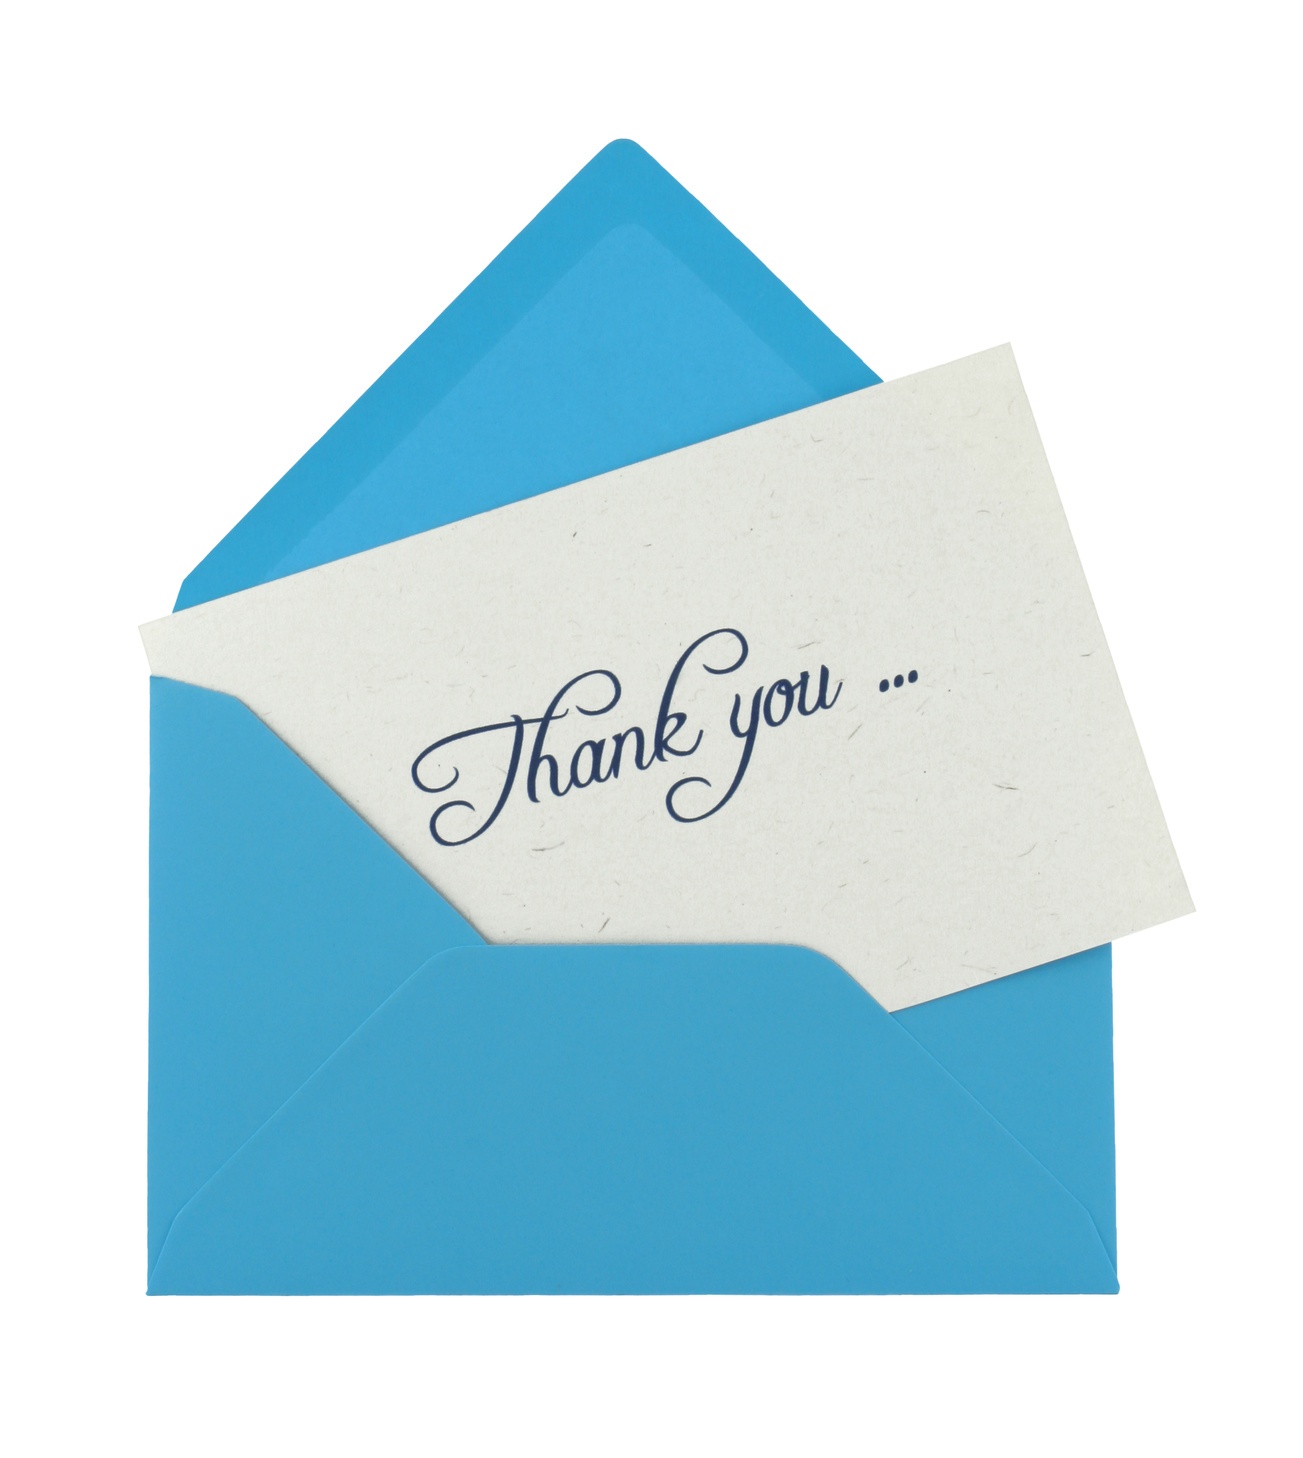 11 Thoughtful Ways to Thank Your Clients and Customers this Year